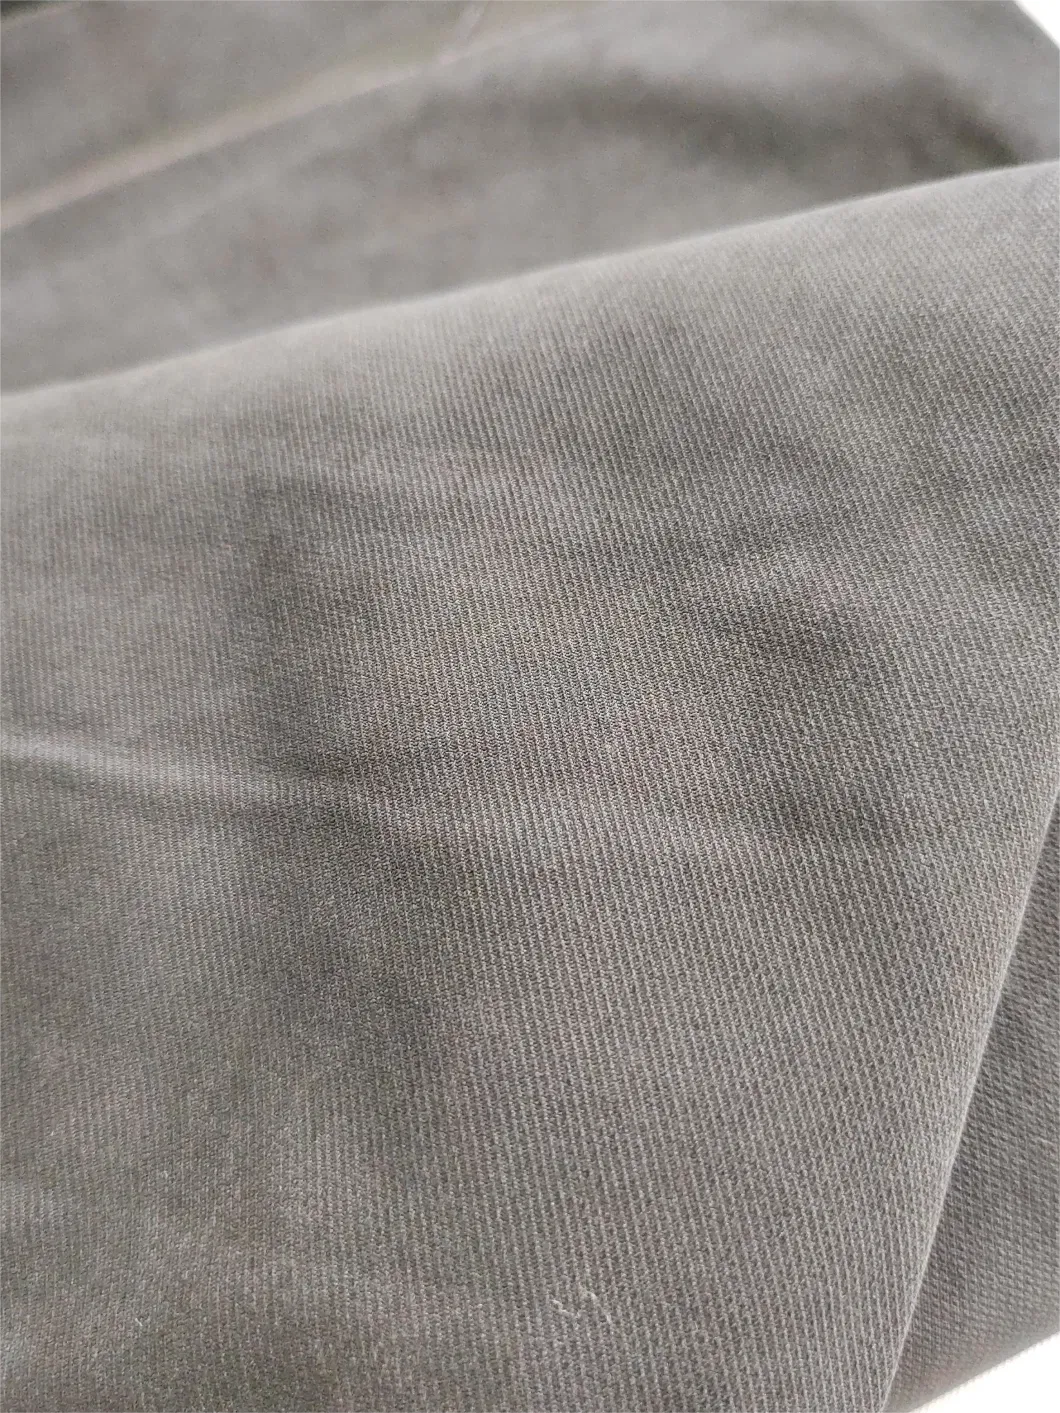 Cheap Factory Woven Fabric 100% Polyester Microfiber Peach Skin Combined Knit Fabric for Garment